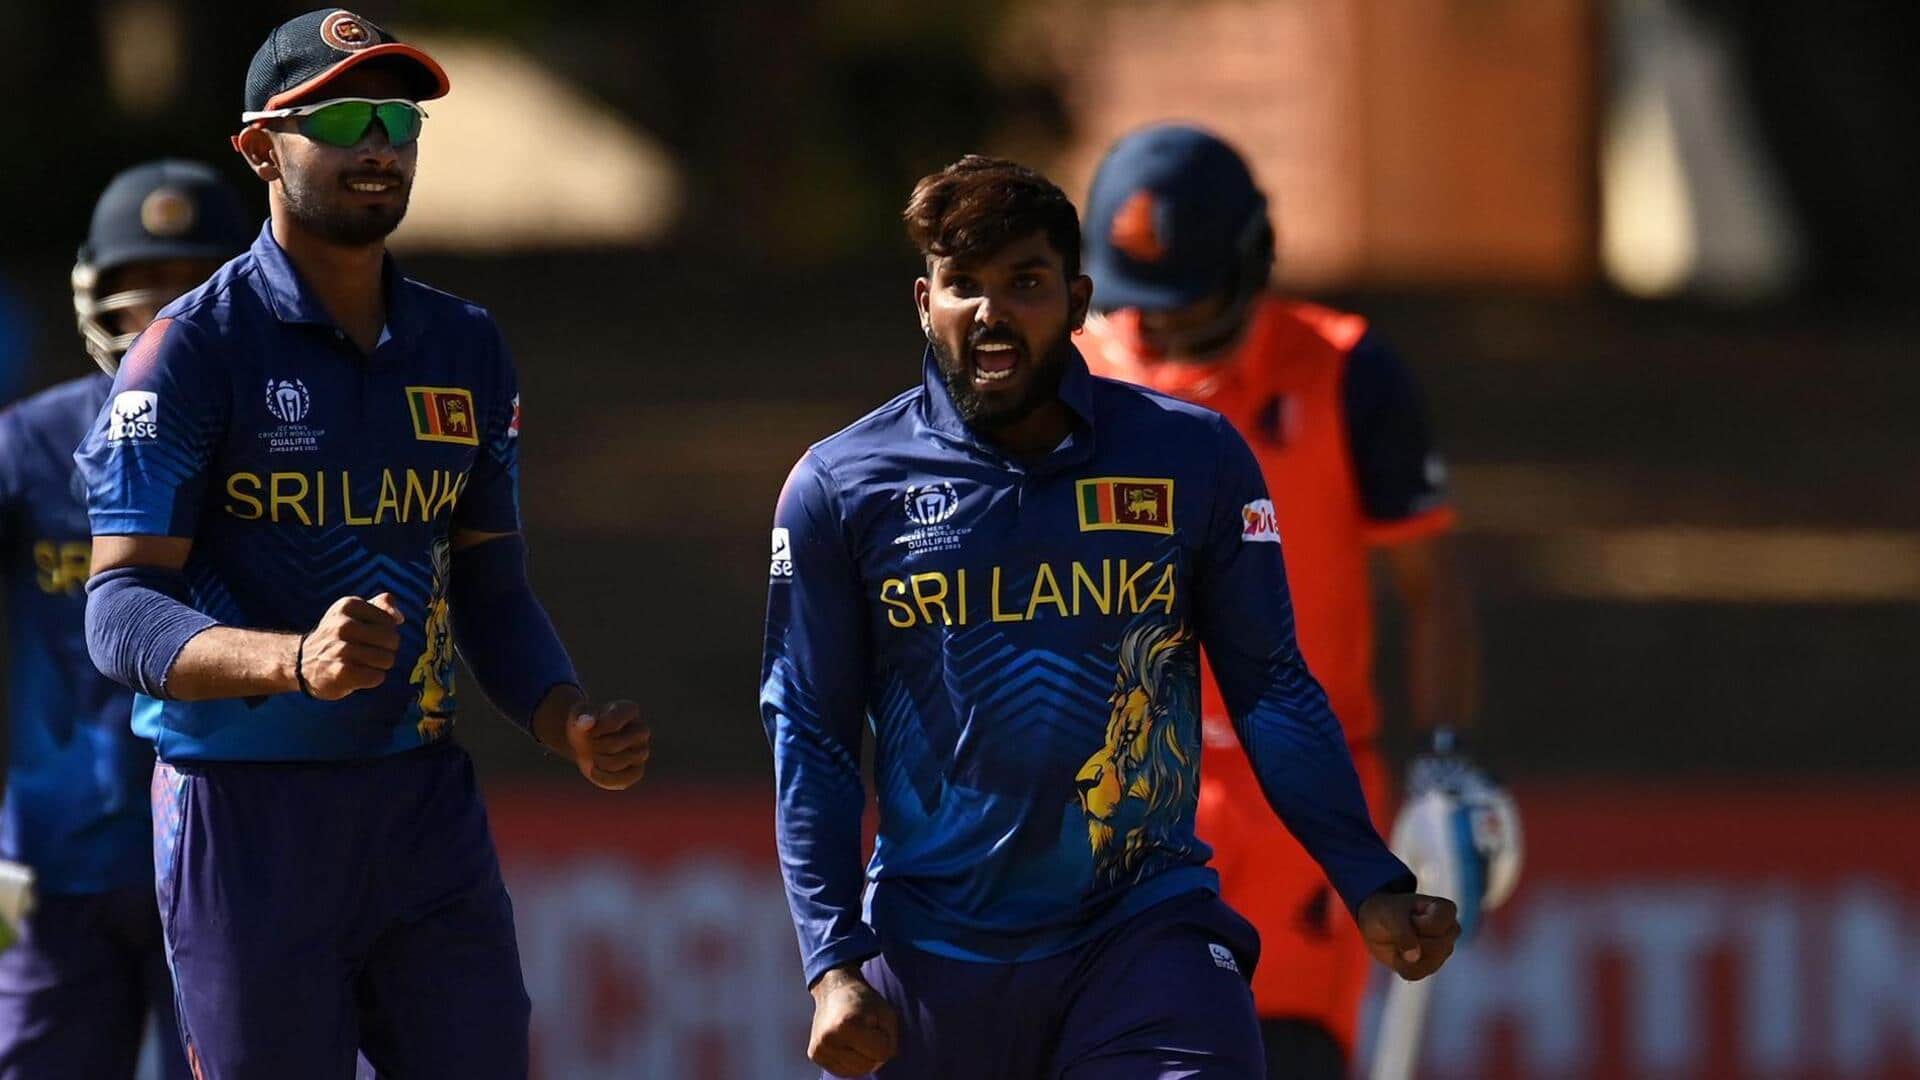 CWC Qualifiers final, Sri Lanka vs Netherlands: Preview and stats